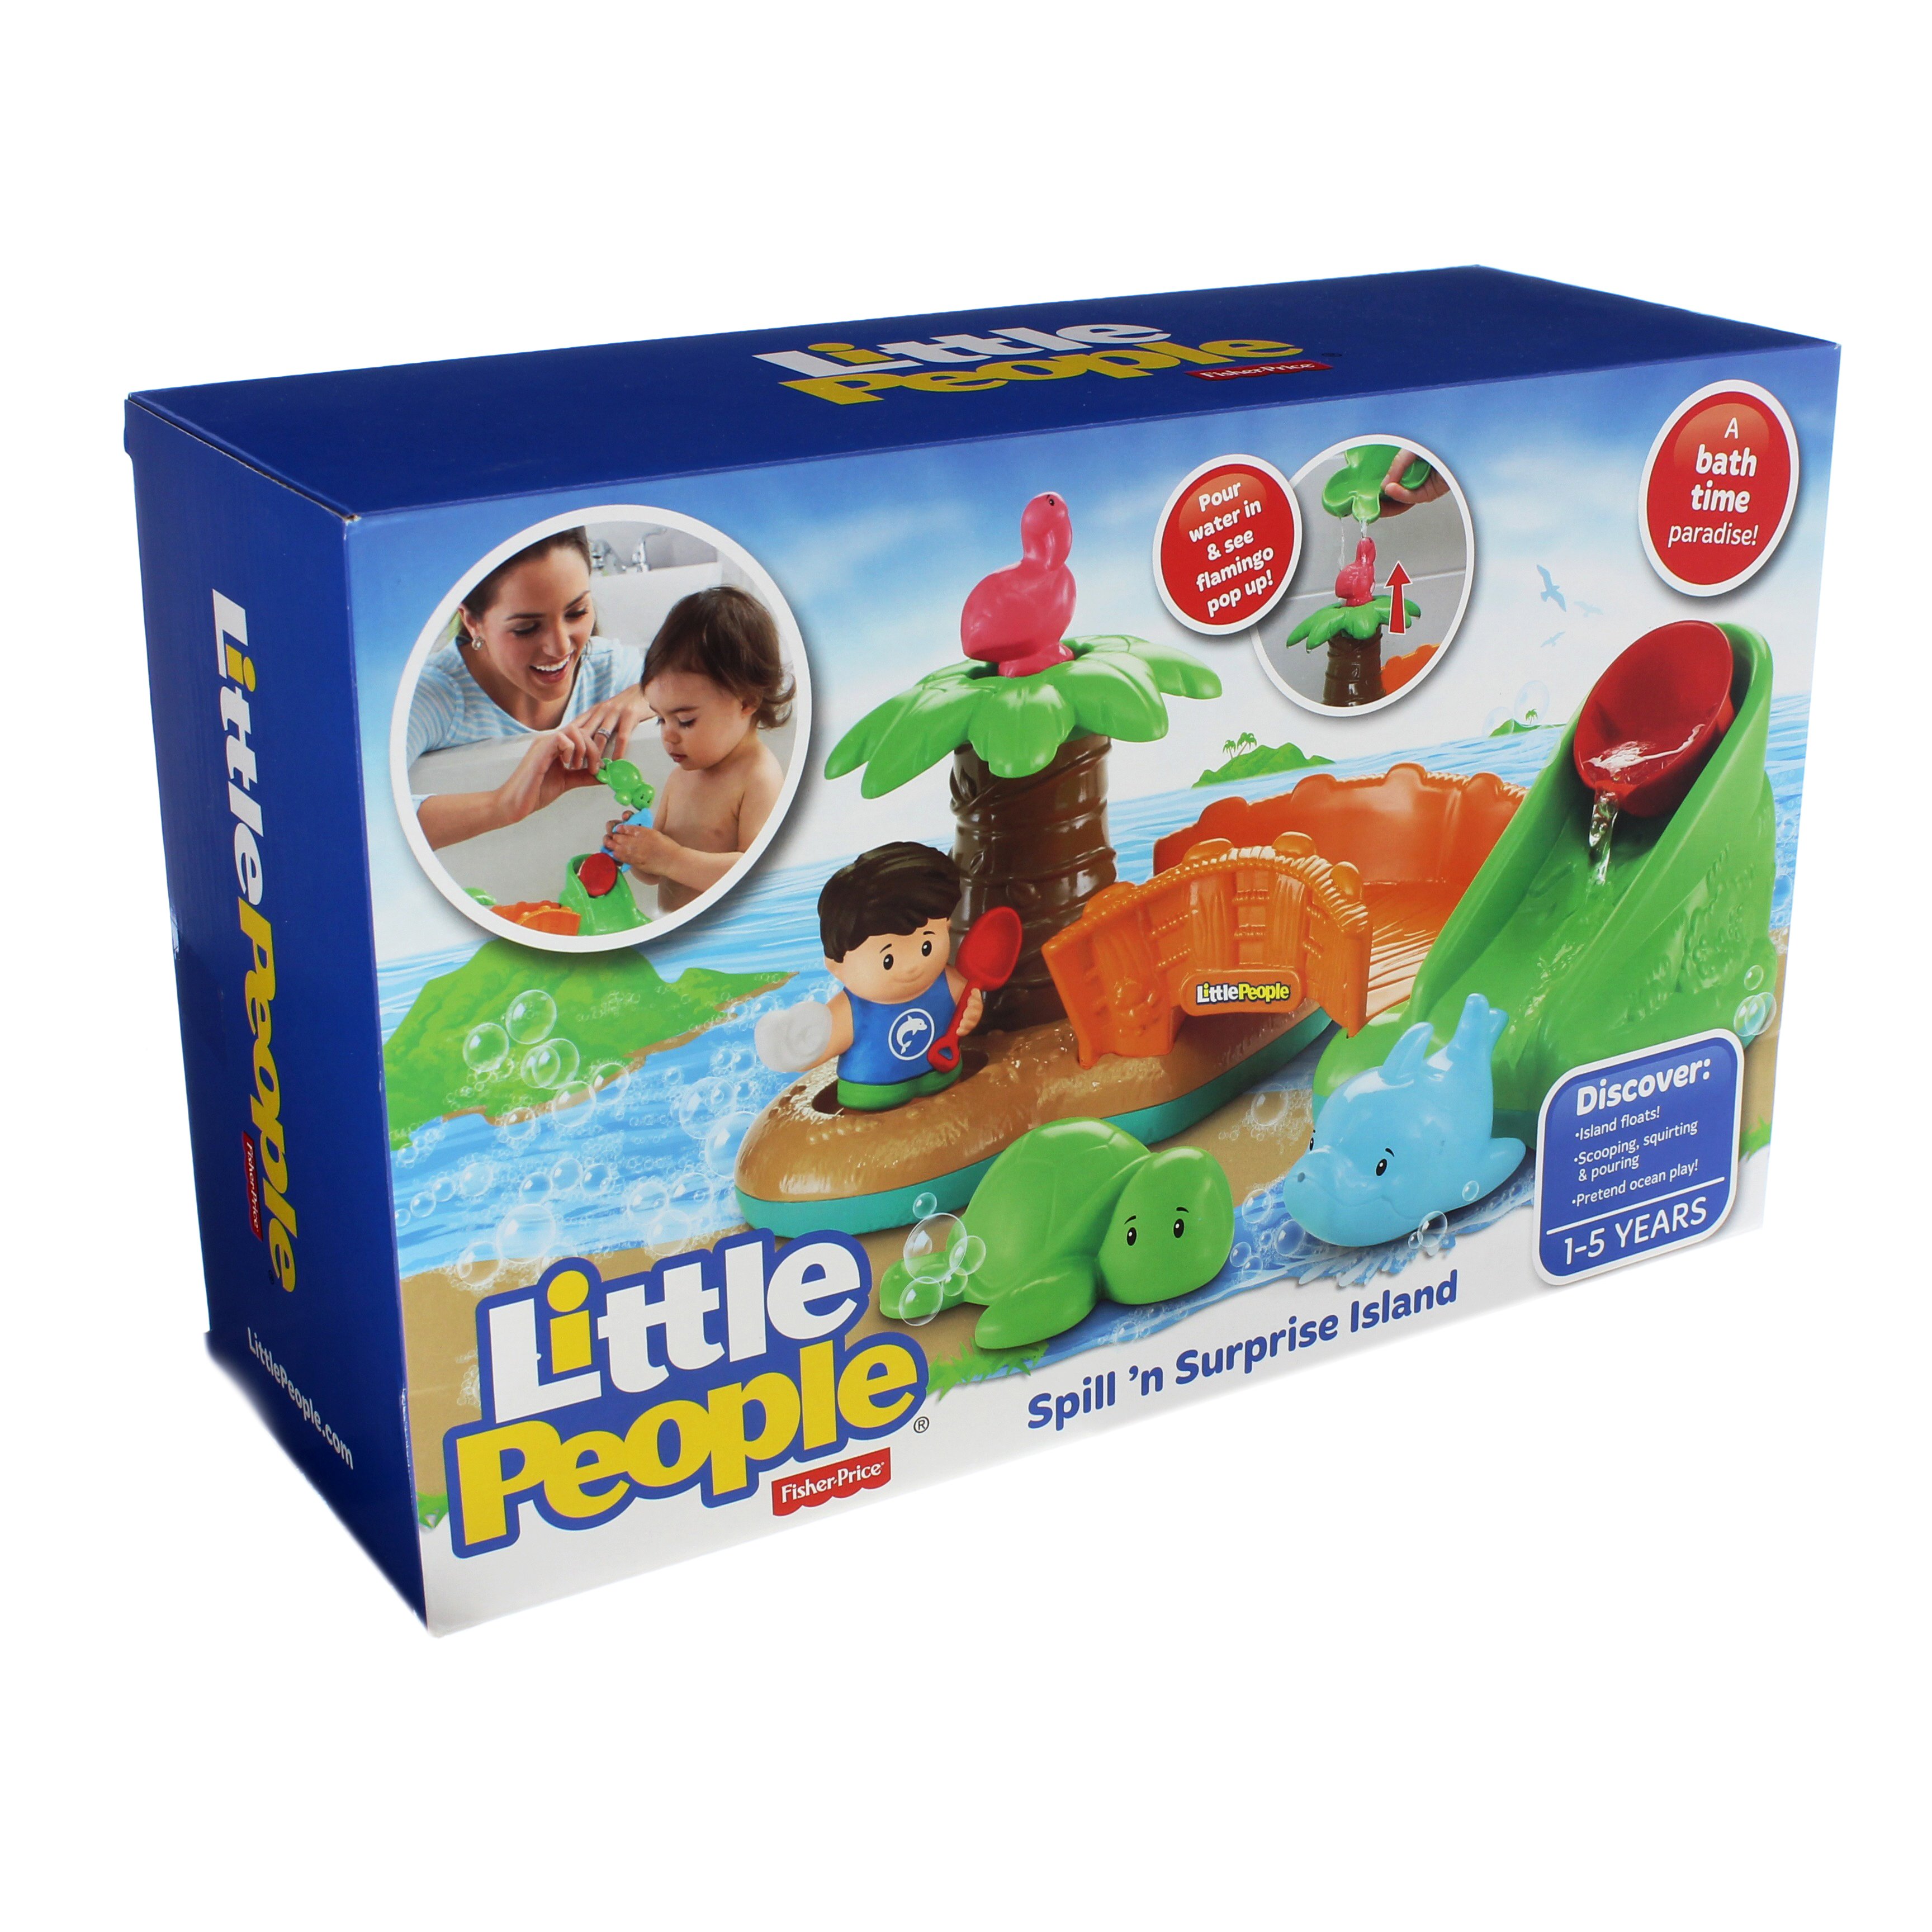 Fisher-Price Little People Spill 'n Surprise Island - Shop Playsets at H-E-B